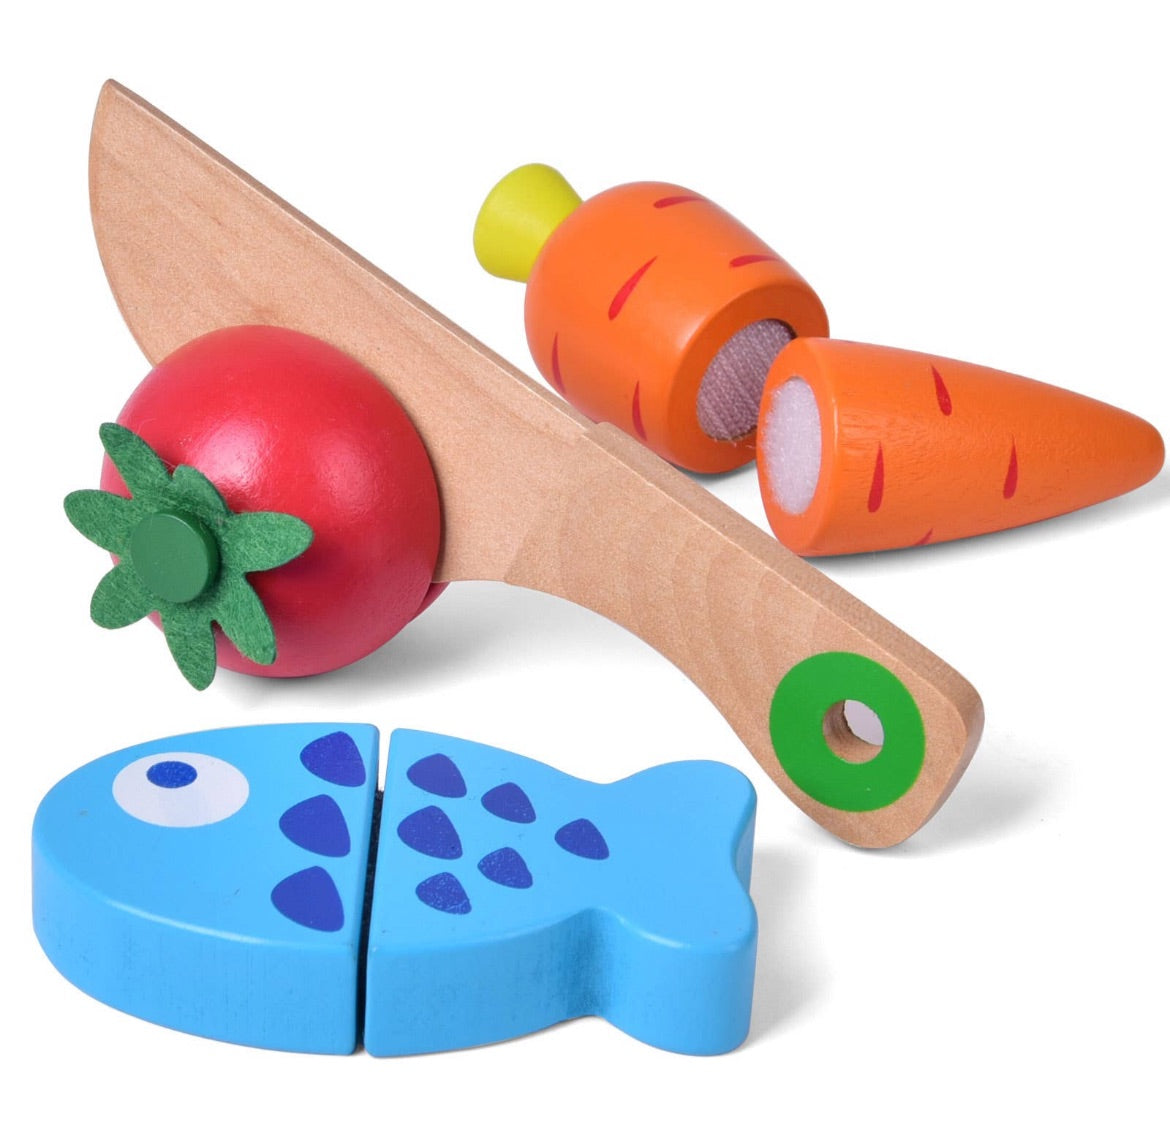 Wooden Play Cutting Set